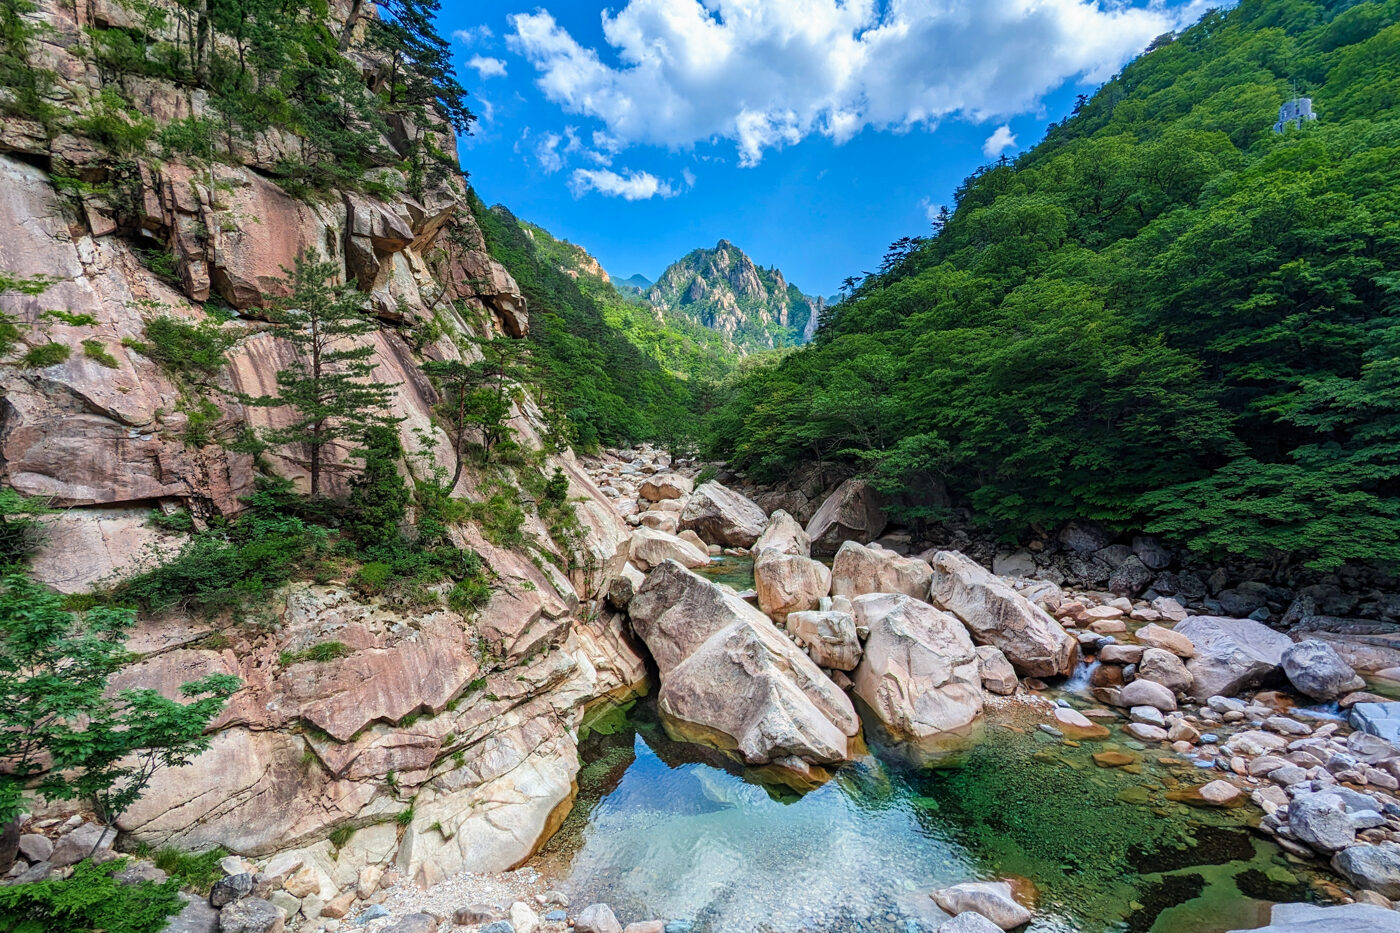 Jagged mountain peaks on the left meet dense forest on the right. In the centre, a calm turquoise river trickles past boulders and pebbles